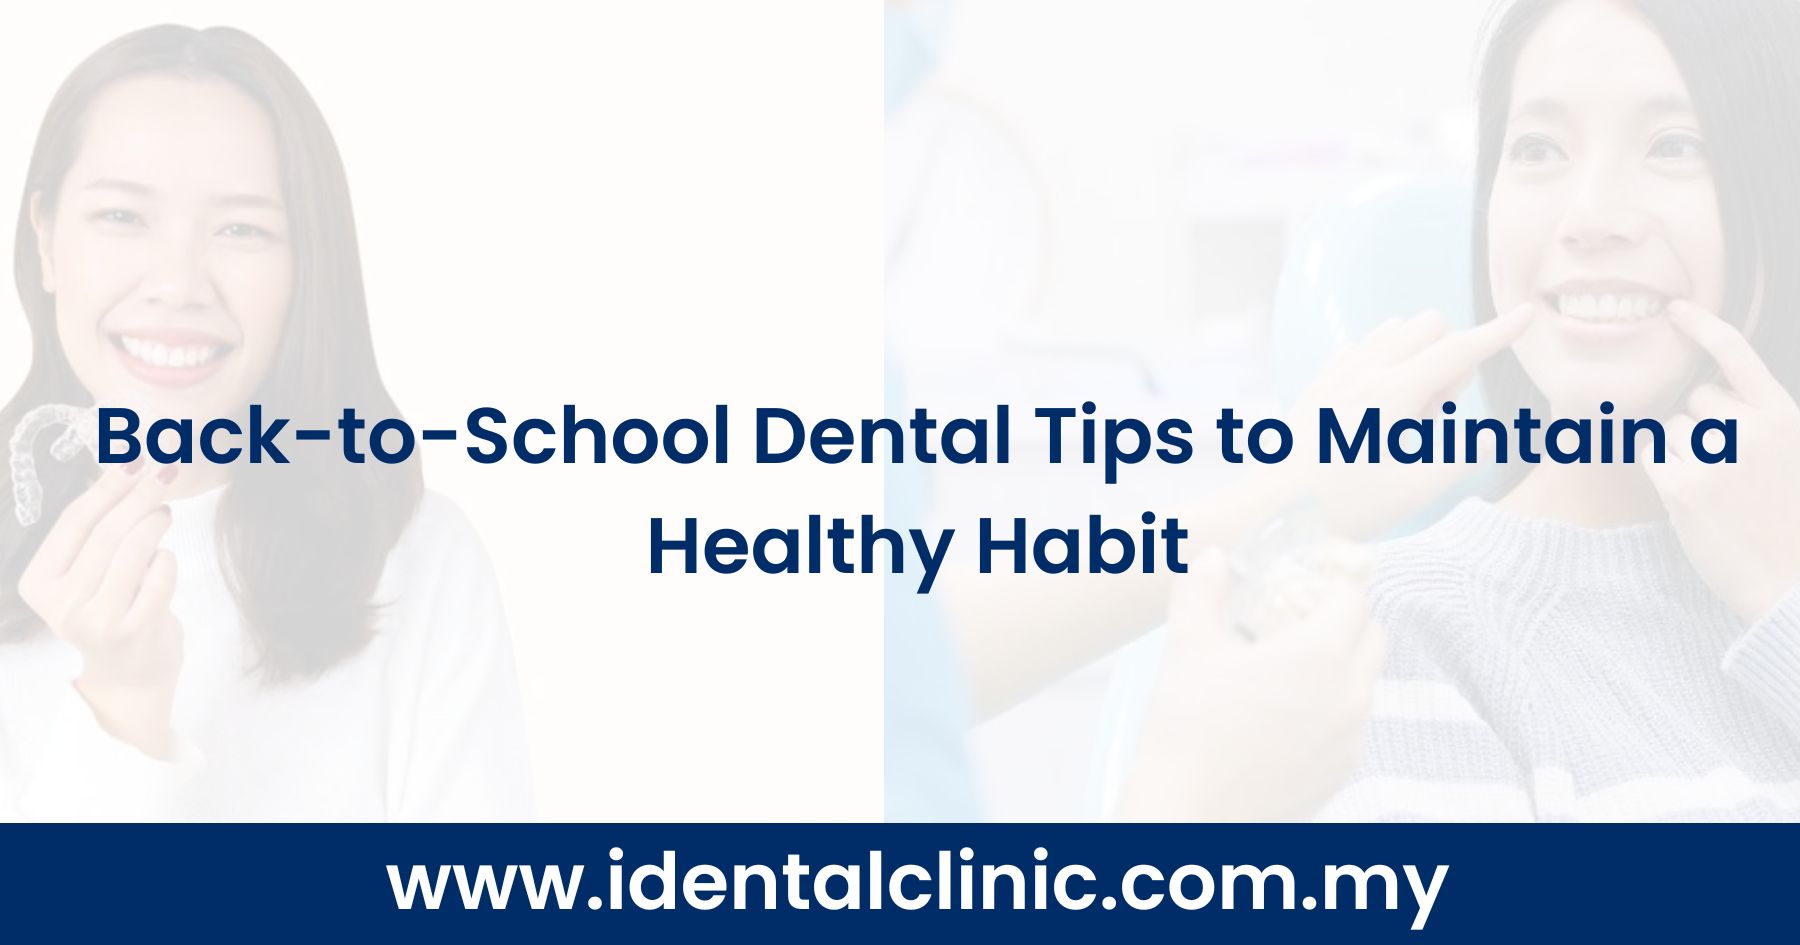 Back-to-School Dental Tips to Maintain a Healthy Habit